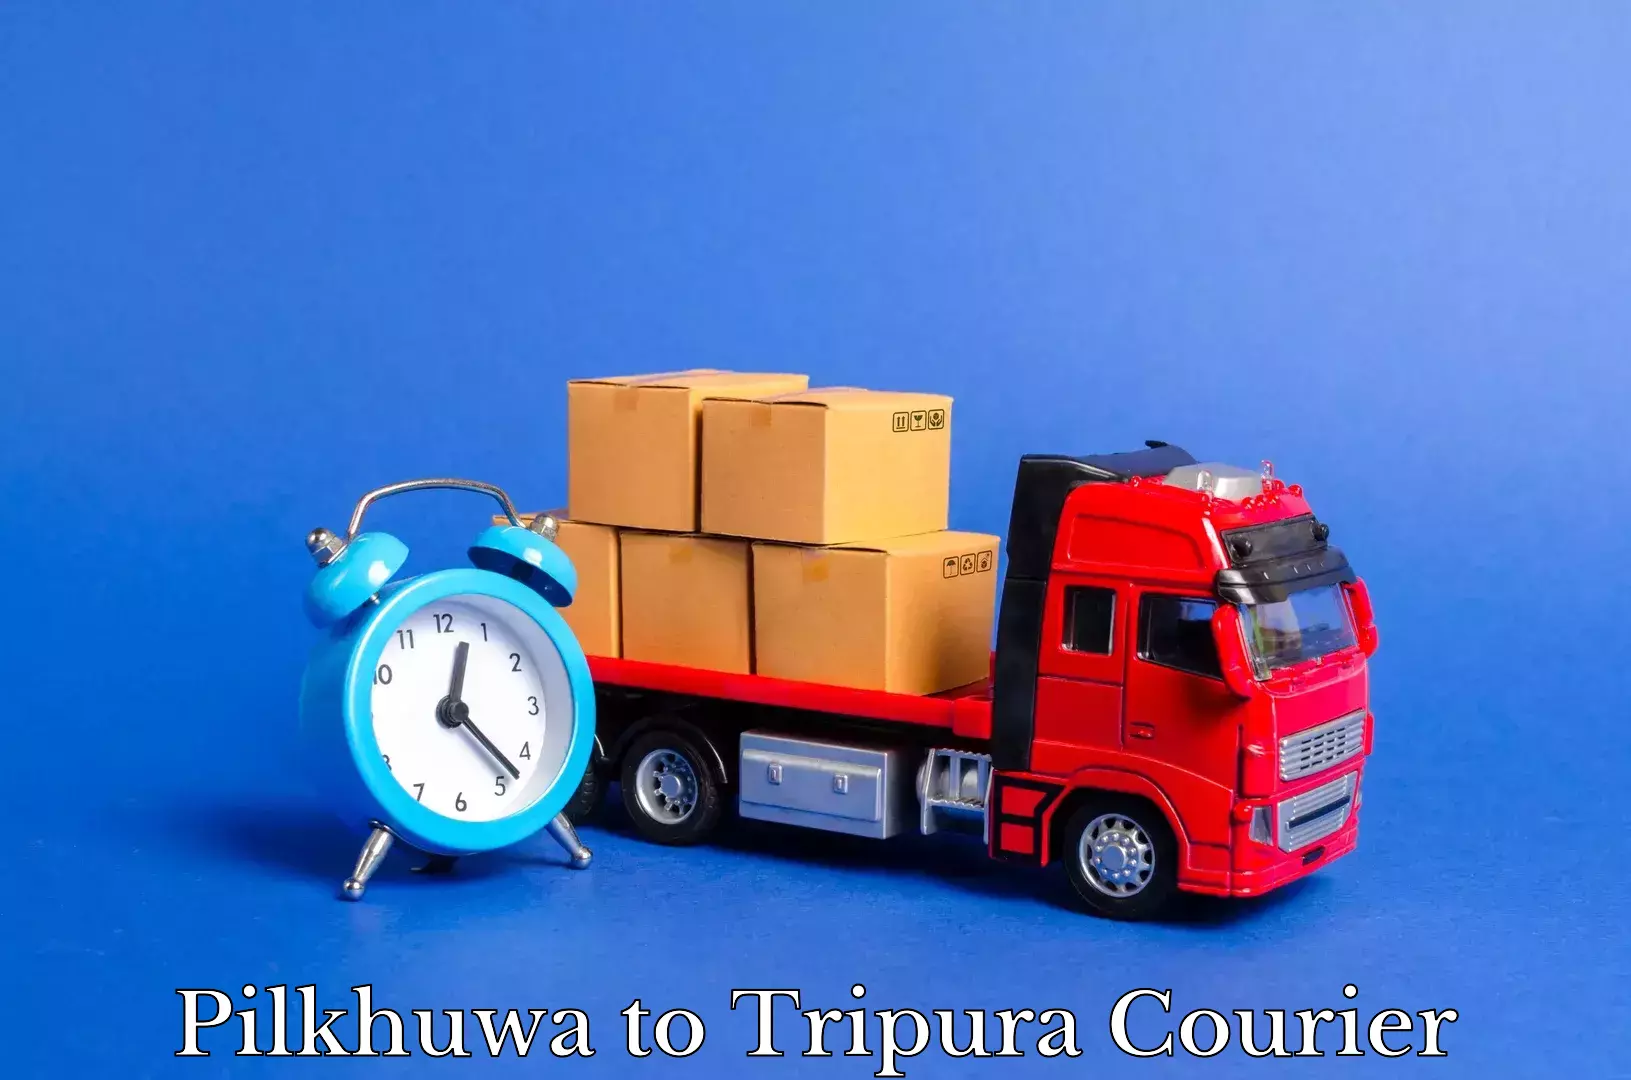 Expert packing and moving Pilkhuwa to Udaipur Tripura